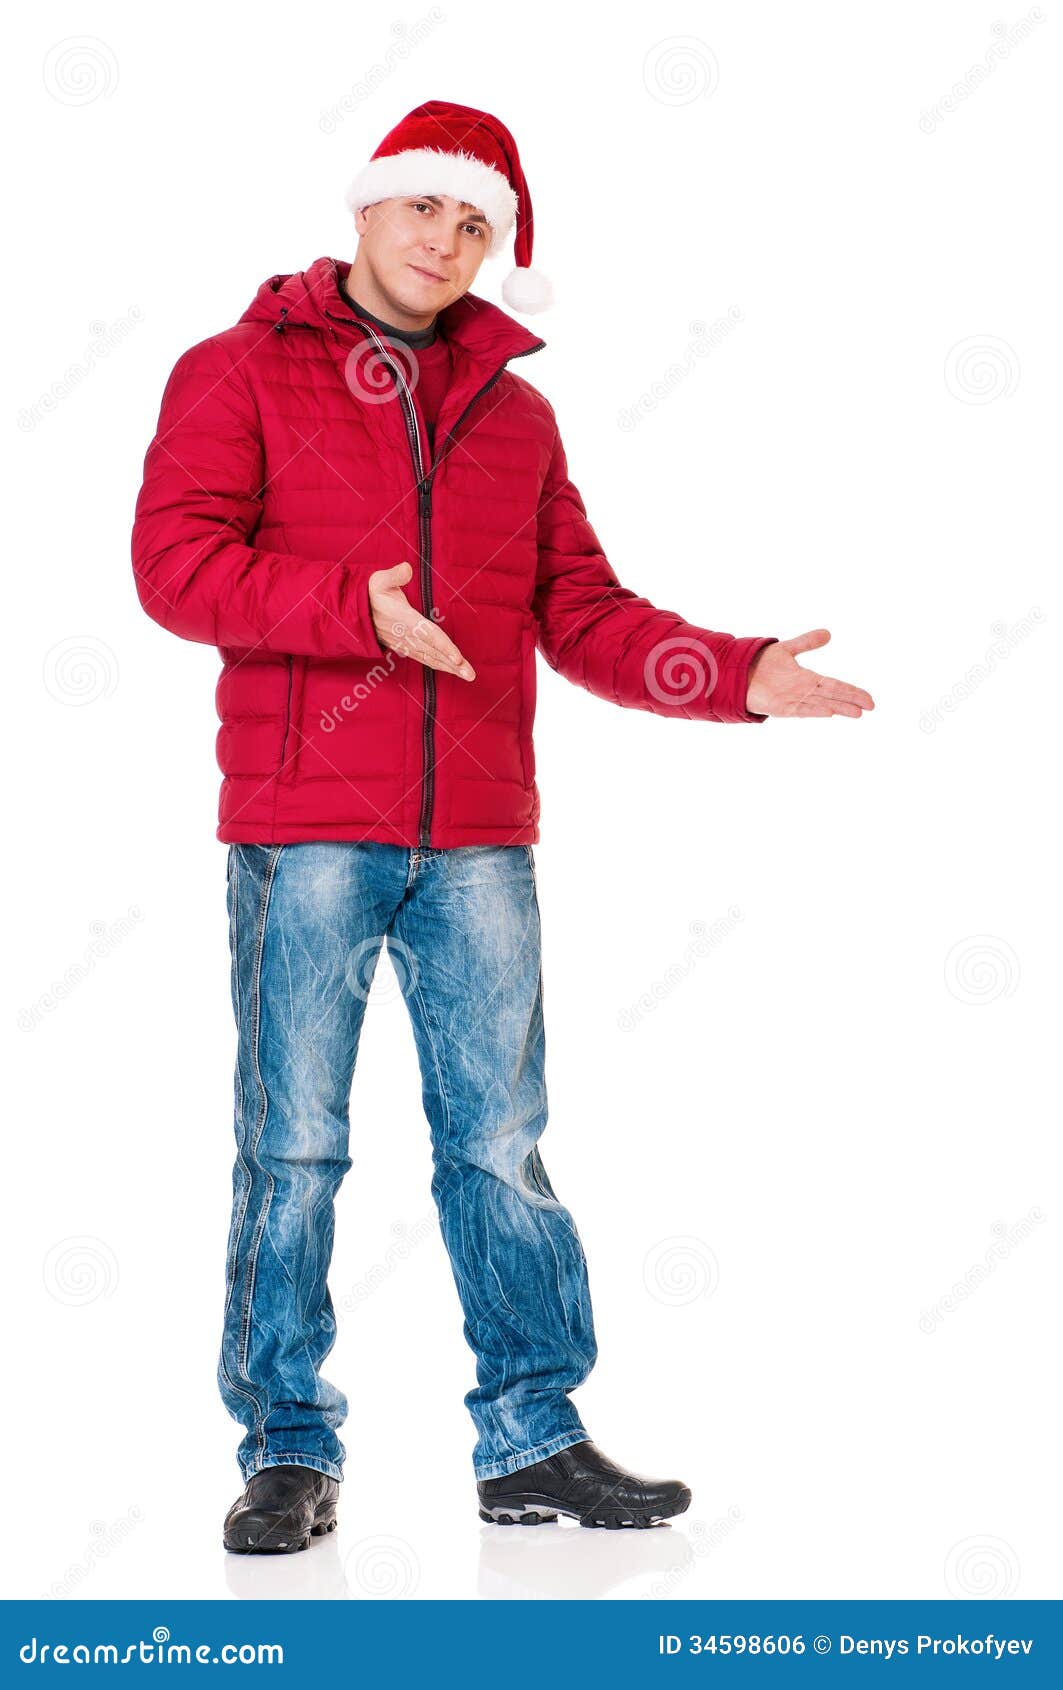 Man in winter clothing stock photo. Image of event, holiday - 34598606